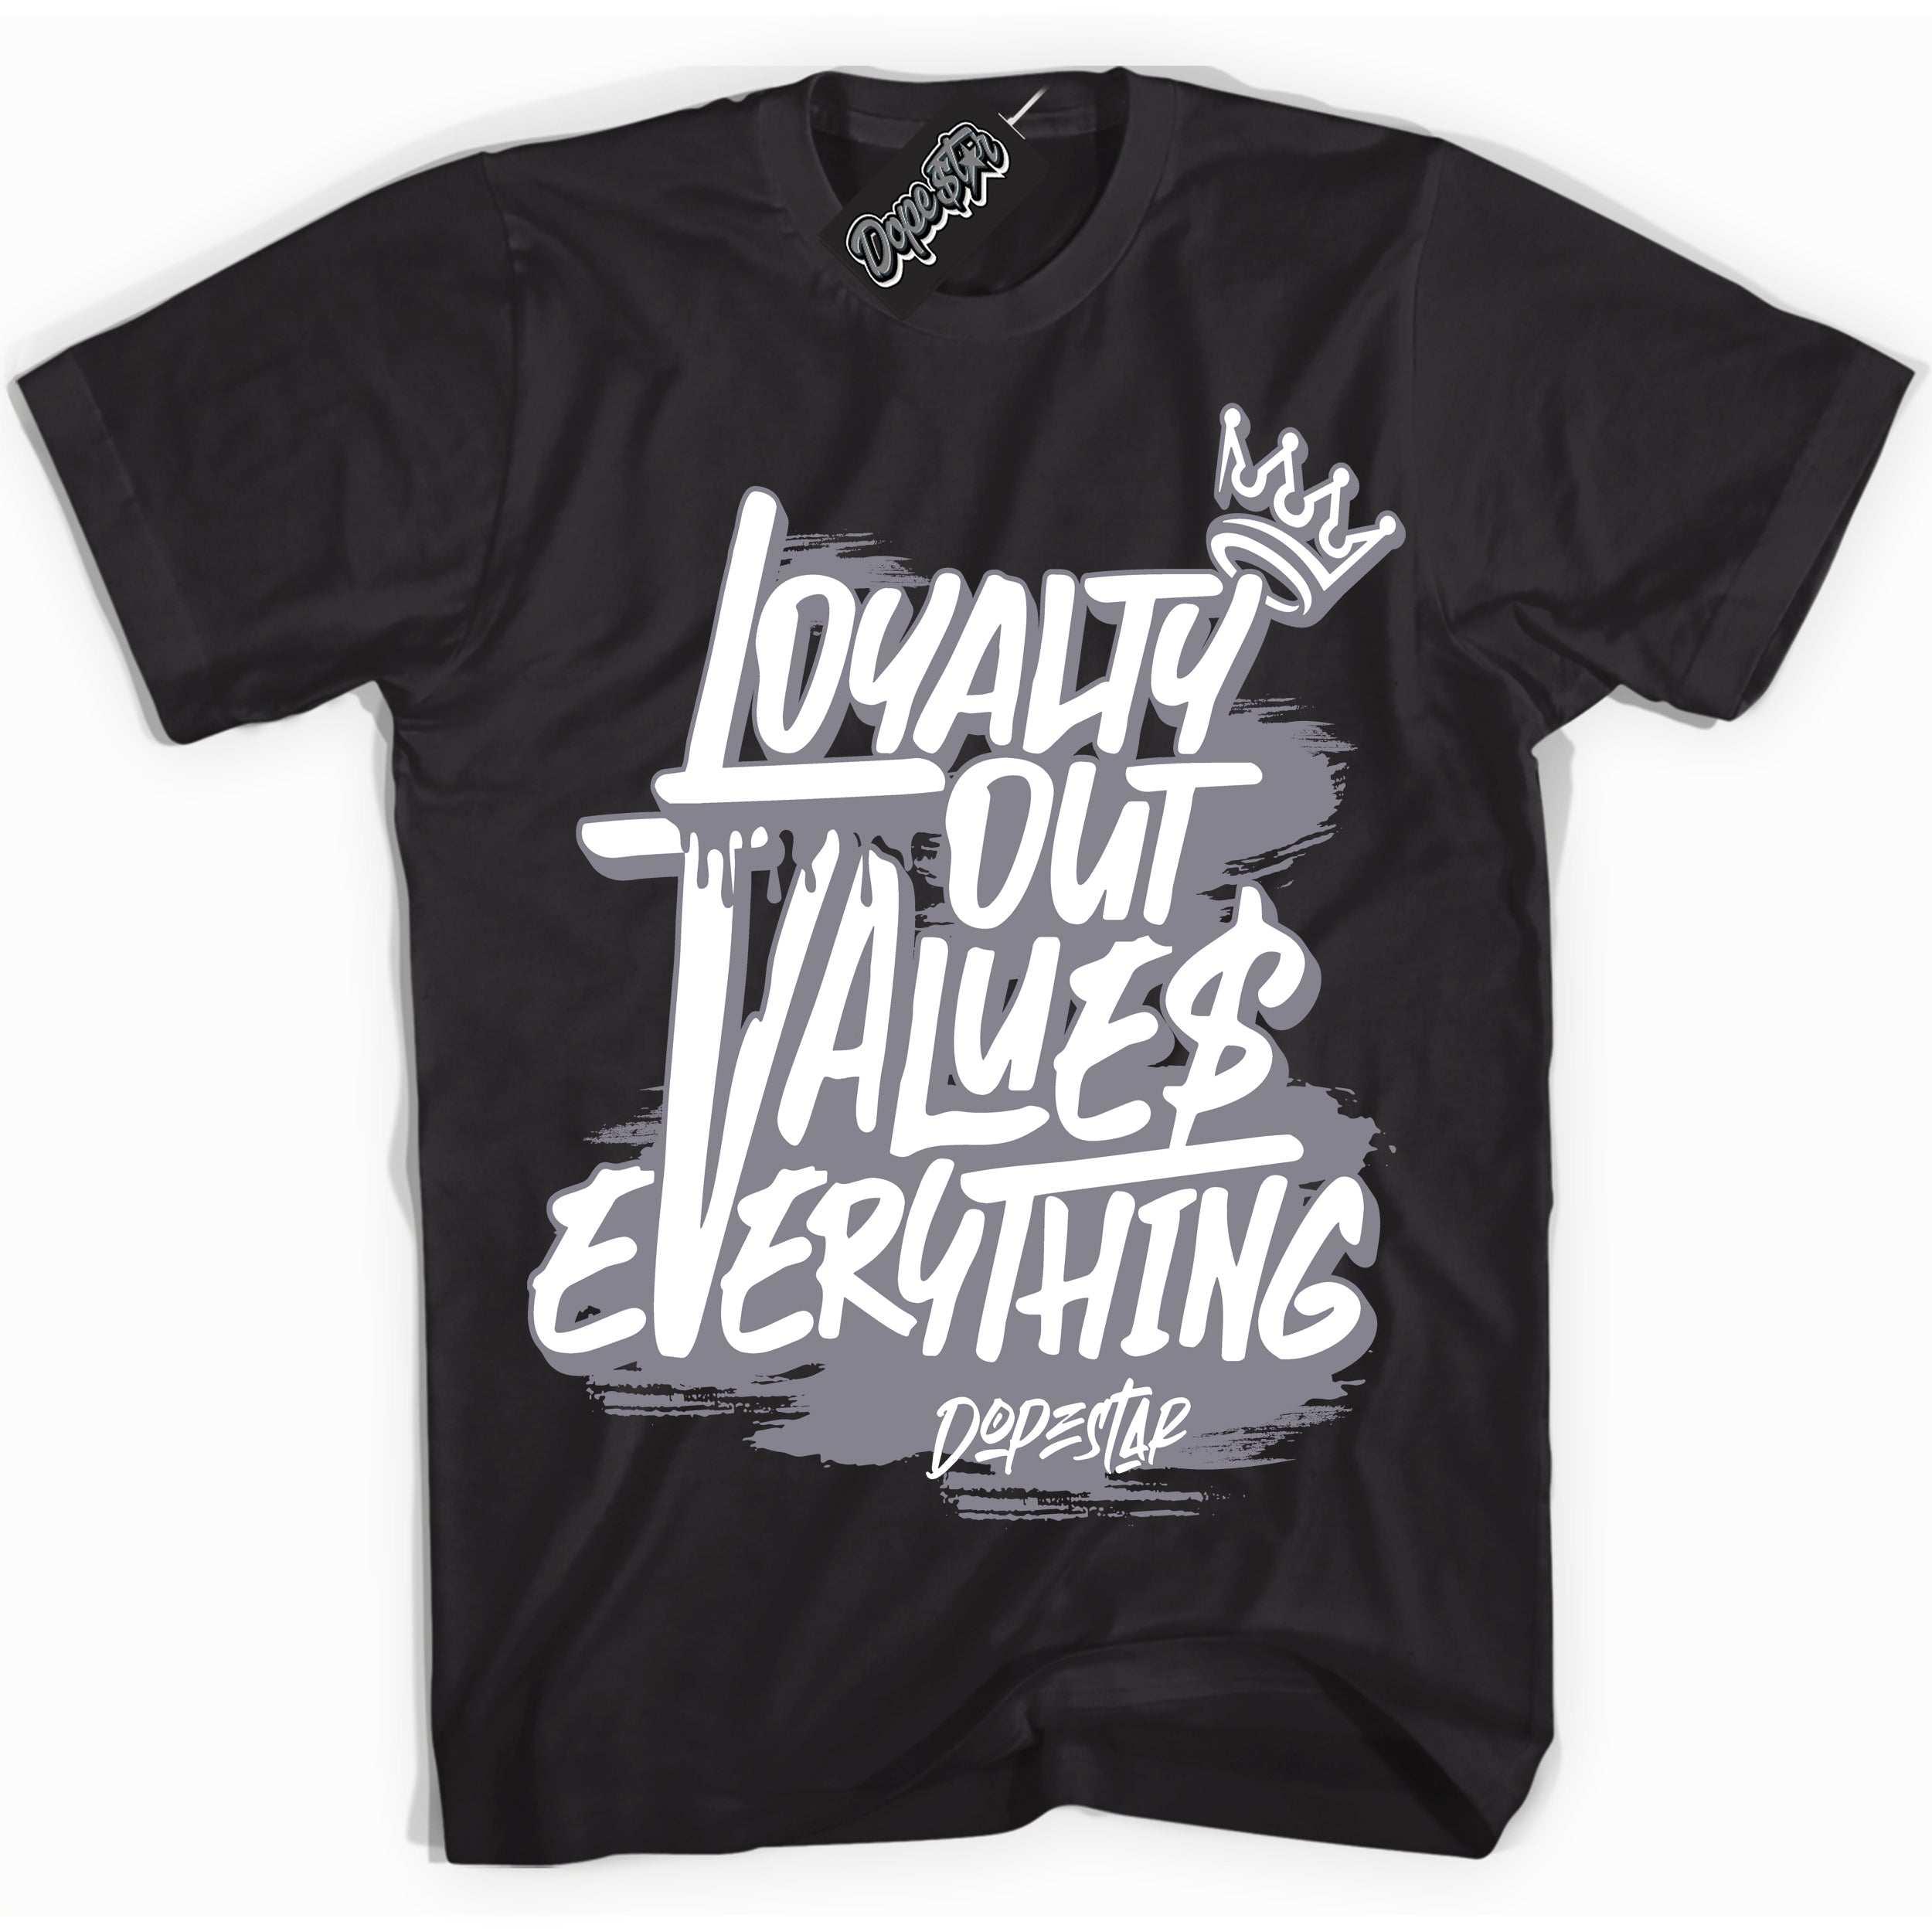 Cool Black Shirt with “ Loyalty Out Values Everything” design that perfectly matches Vintage Stealth Grey 1s Sneakers.